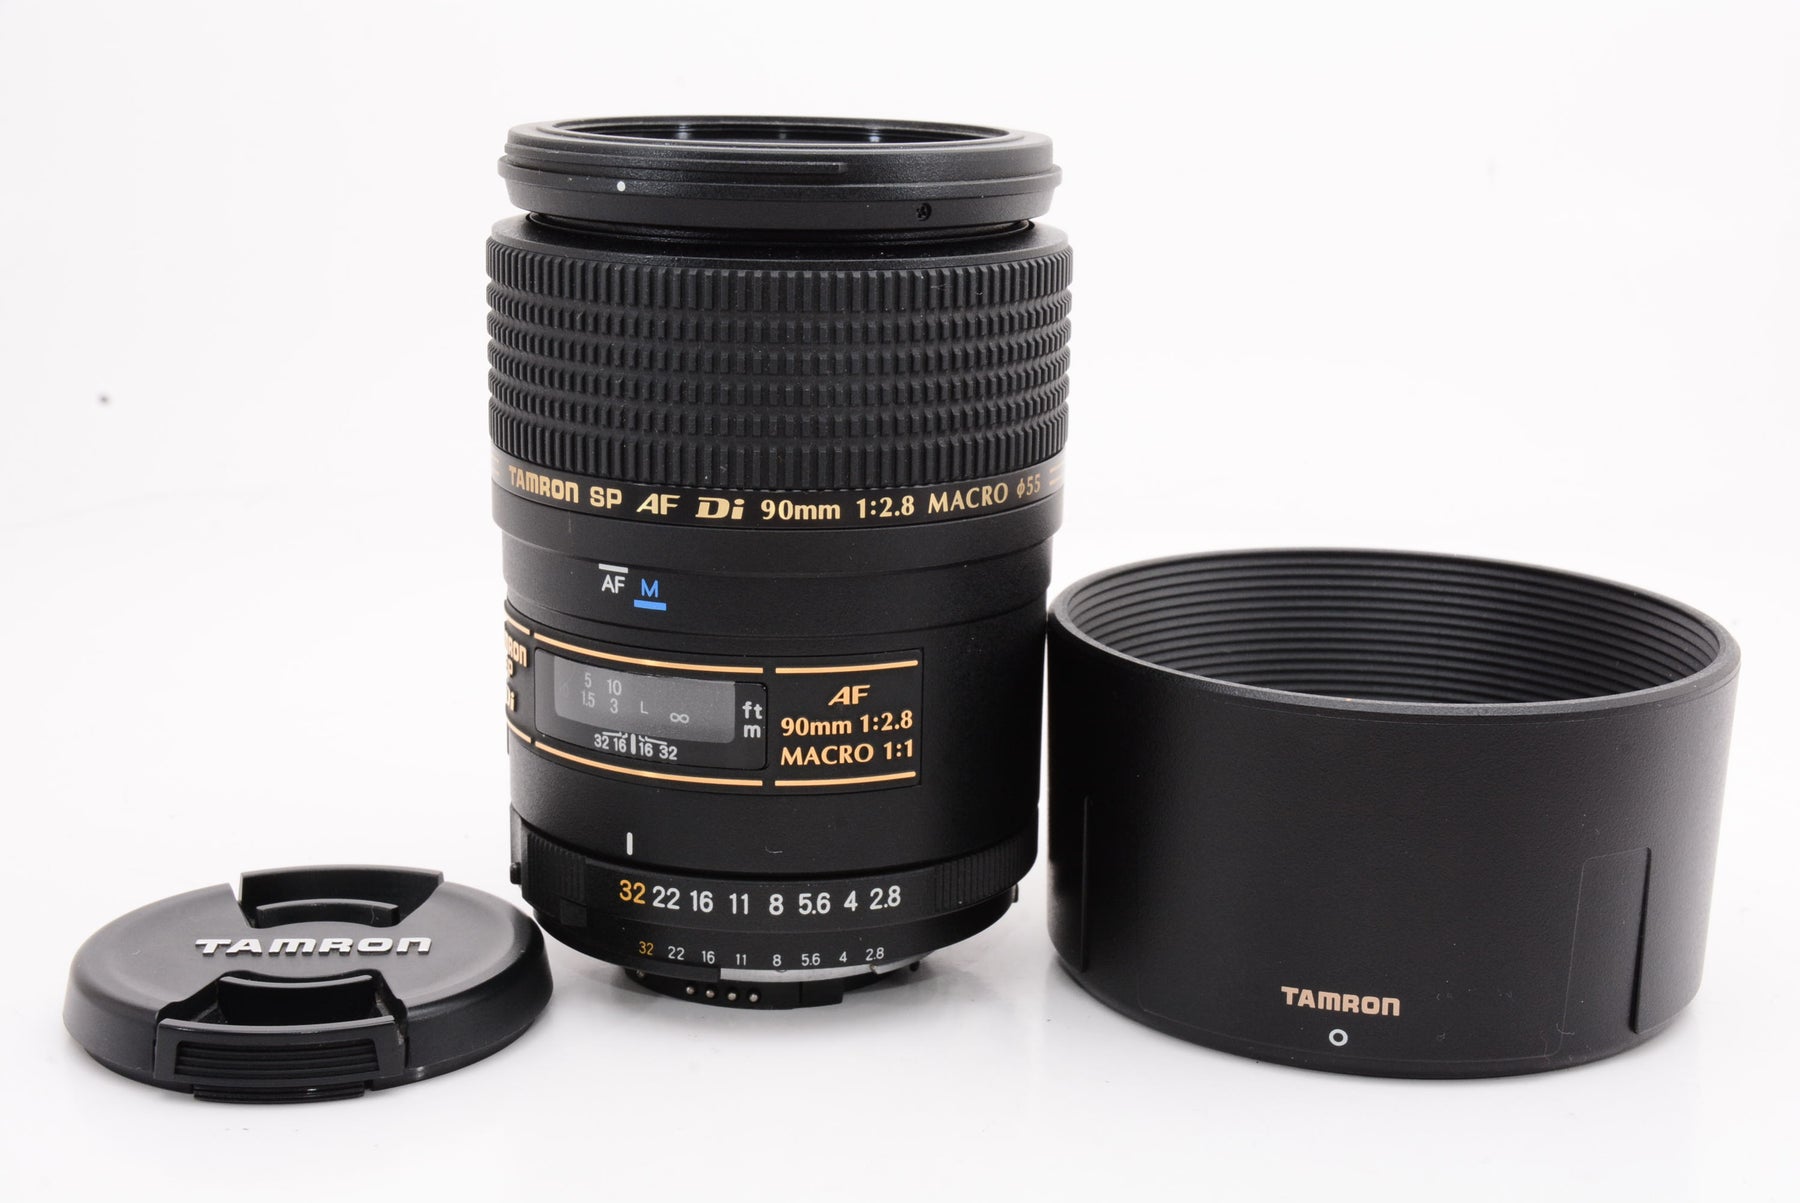 TAMRON SP AF90mm F/2.8 Di MACRO 1:1 ニコン用